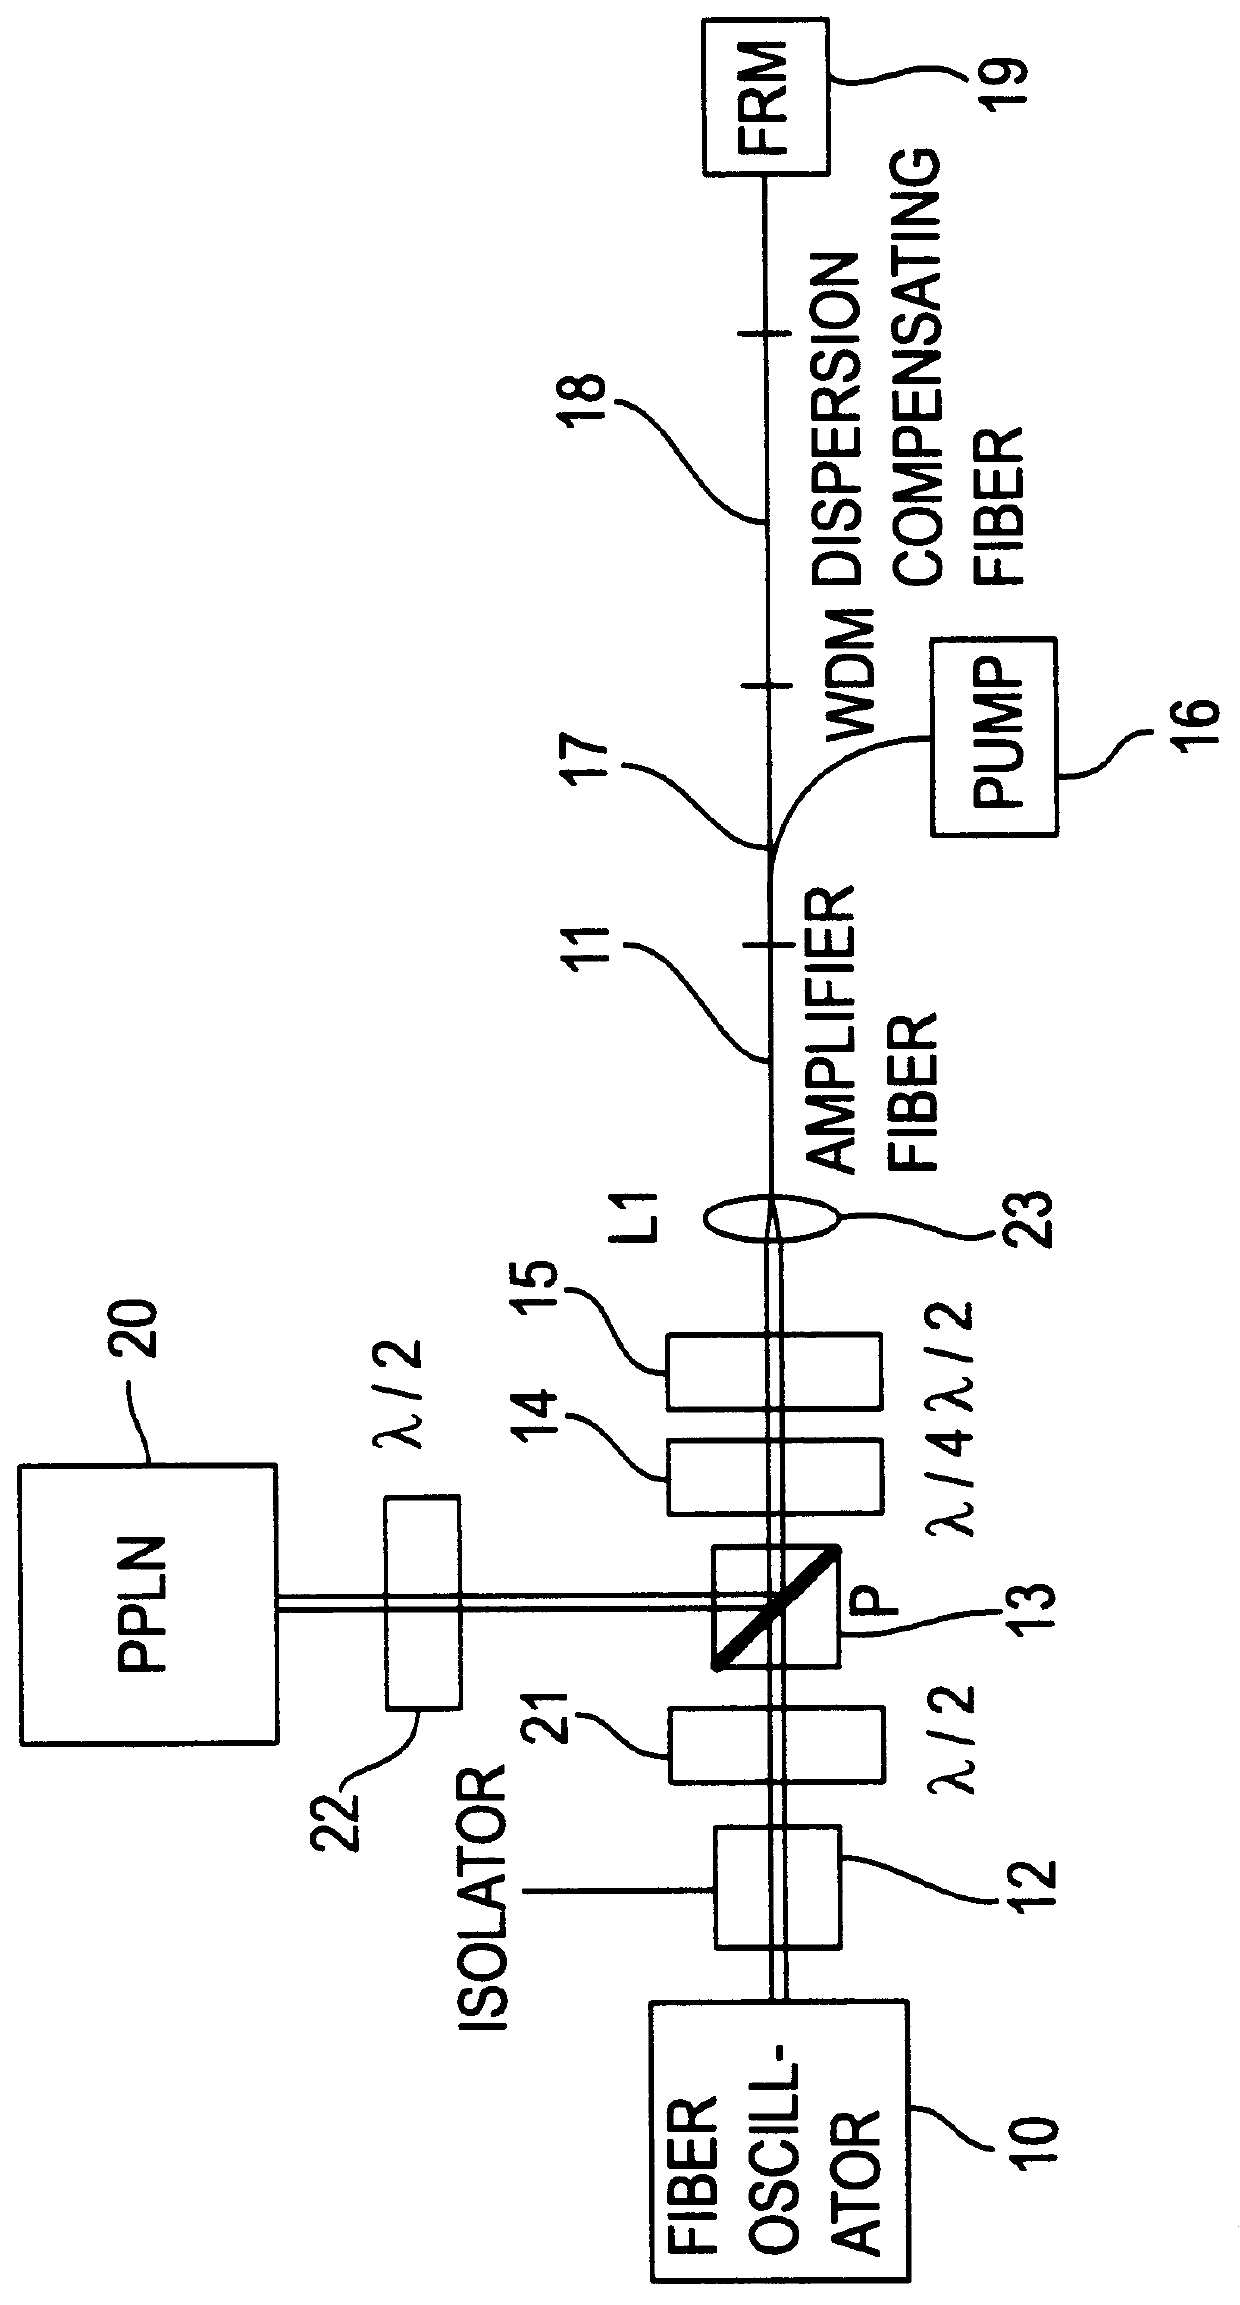 Apparatus and method for the generation of high-power femtosecond pulses from a fiber amplifier